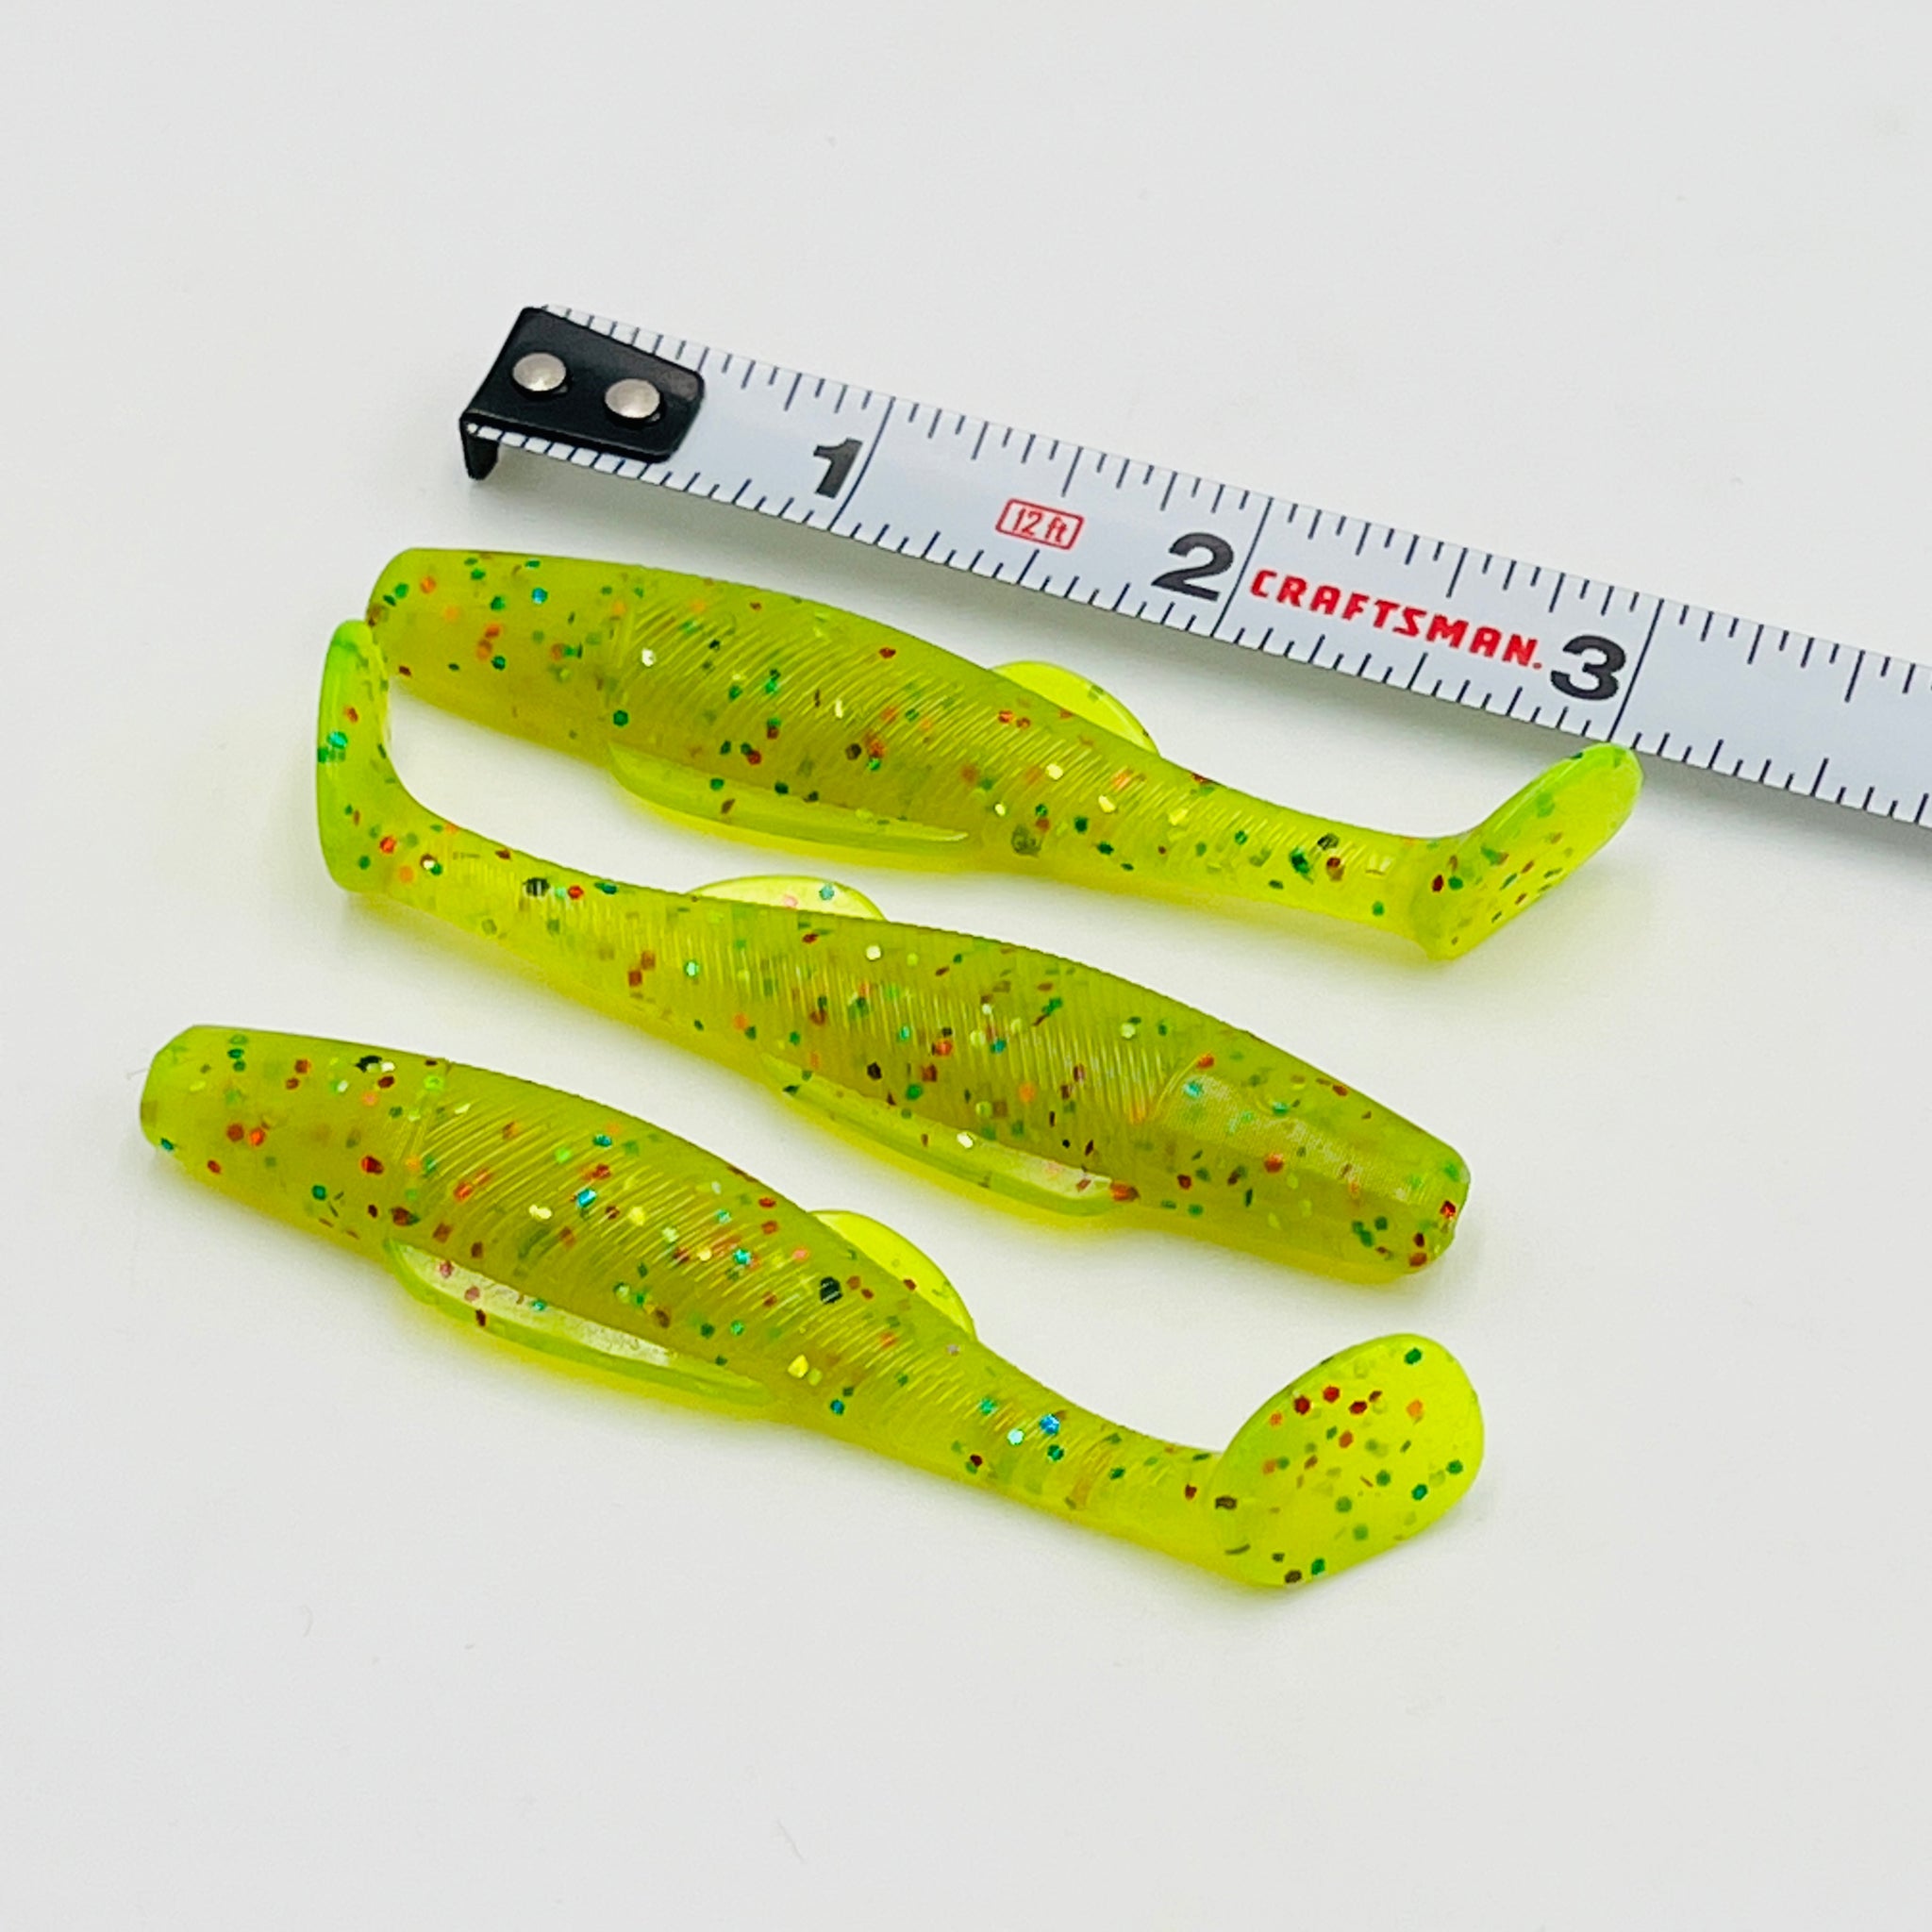 3 Inch Inshore Paddle Tail Swimbait Hand Injection Mold – Epic